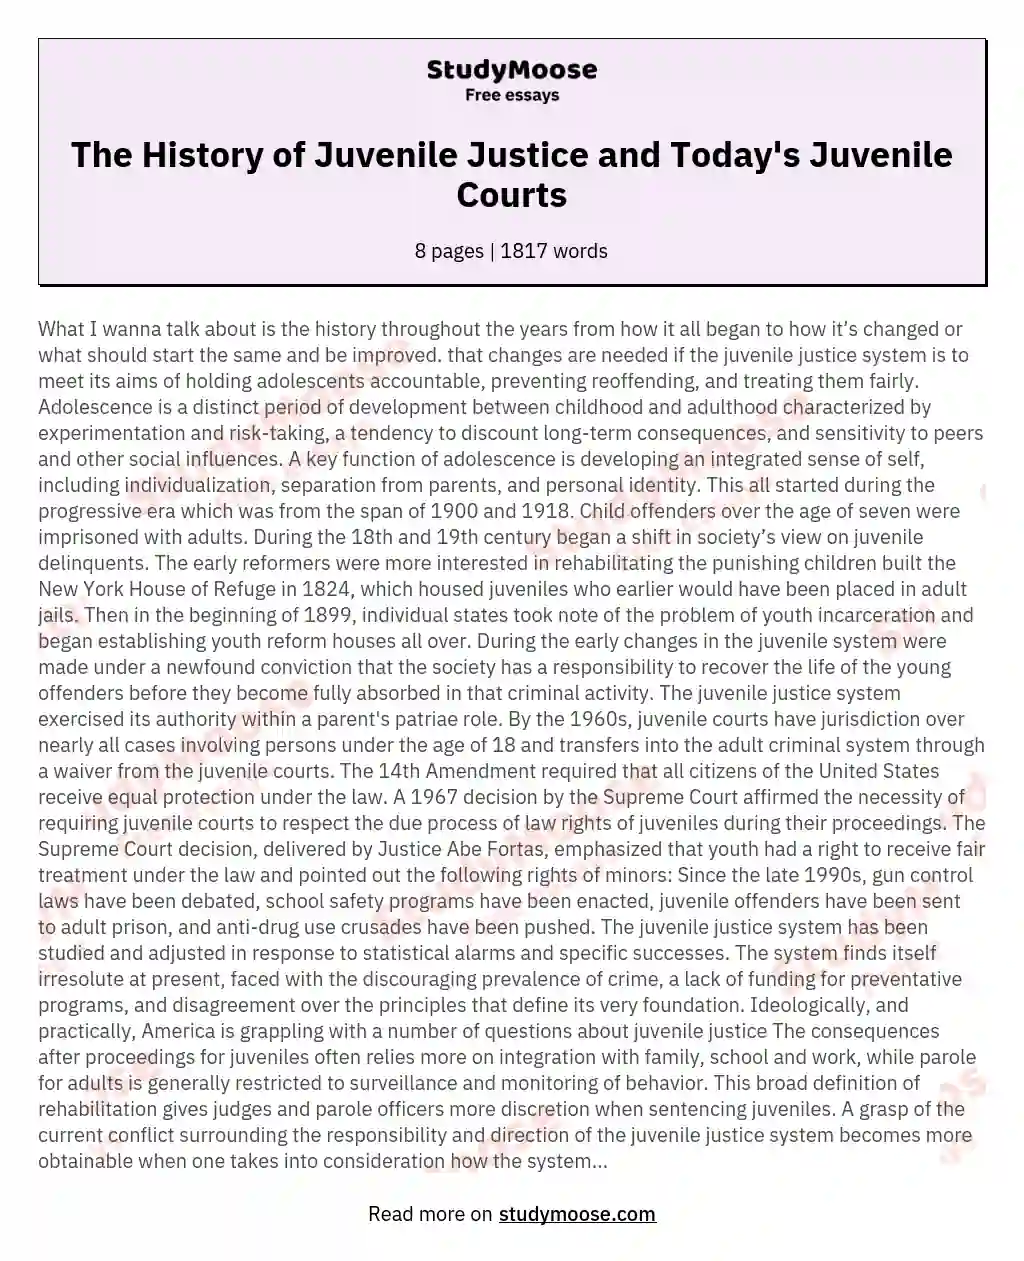 The History of Juvenile Justice and Today's Juvenile Courts